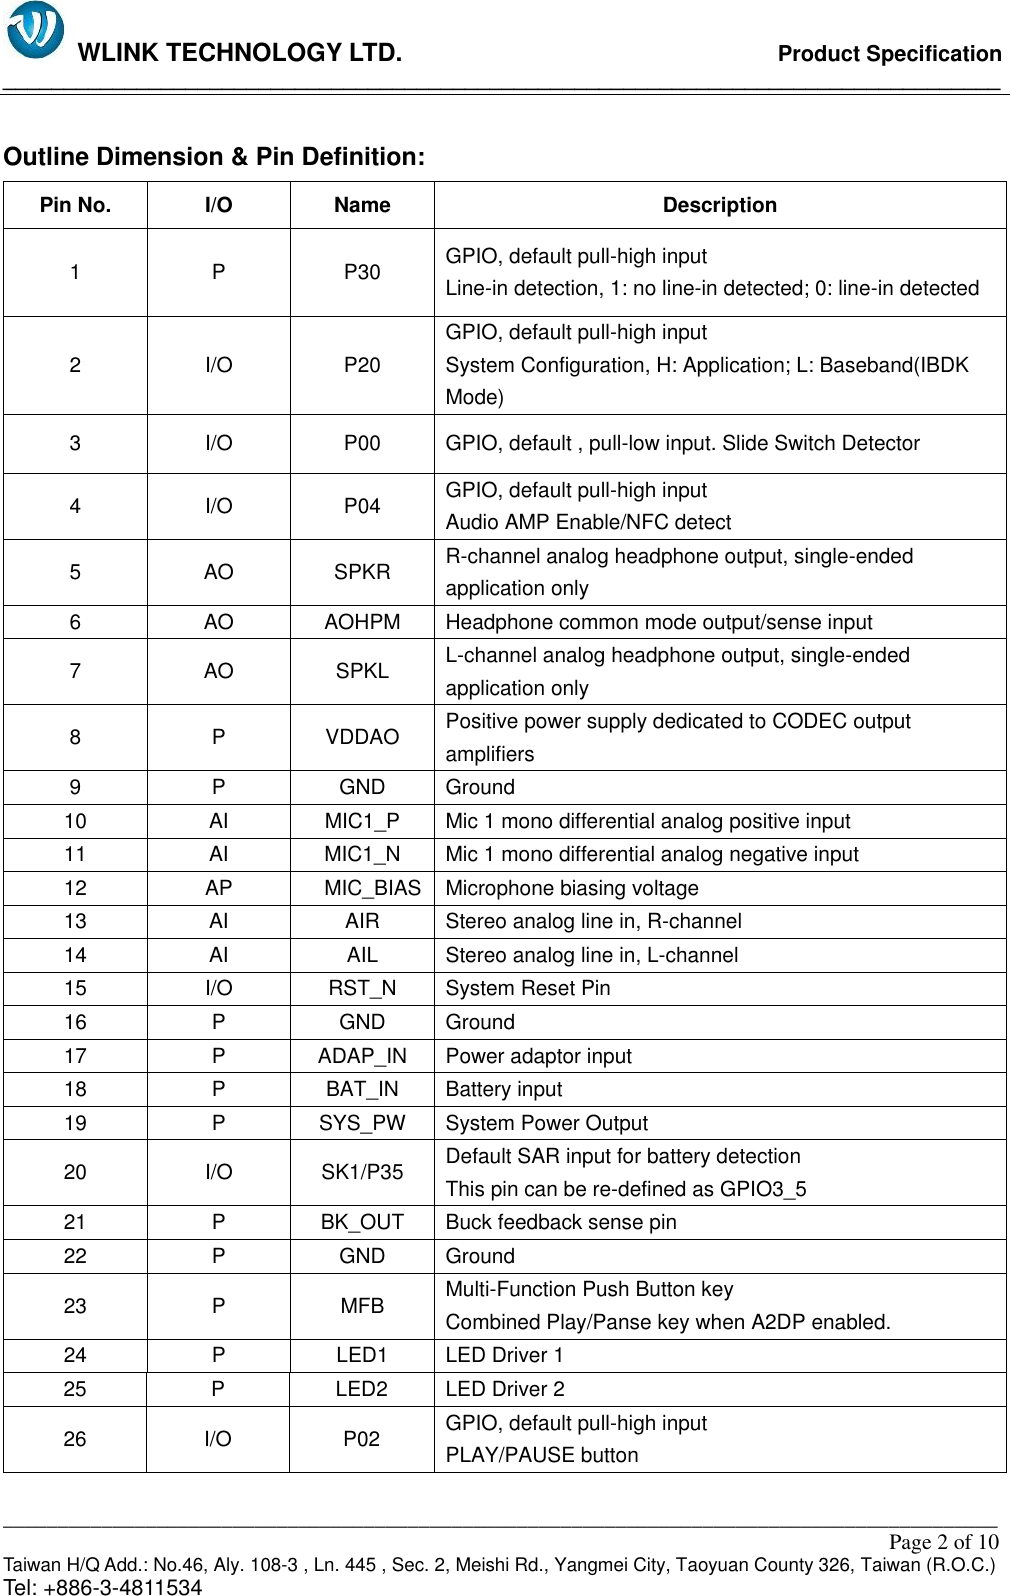   WLINK TECHNOLOGY LTD.                              Product Specification __________________________________________________________________________________ ___________________________________________________________________________________________                                                                                                                                                         Page 2 of 10 Taiwan H/Q Add.: No.46, Aly. 108-3 , Ln. 445 , Sec. 2, Meishi Rd., Yangmei City, Taoyuan County 326, Taiwan (R.O.C.)   Tel: +886-3-4811534  Outline Dimension &amp; Pin Definition: Pin No. I/O Name Description 1 P P30 GPIO, default pull-high input                                                                     Line-in detection, 1: no line-in detected; 0: line-in detected 2 I/O P20 GPIO, default pull-high input                                                                     System Configuration, H: Application; L: Baseband(IBDK Mode) 3 I/O P00 GPIO, default , pull-low input. Slide Switch Detector 4 I/O P04 GPIO, default pull-high input                                                                     Audio AMP Enable/NFC detect 5 AO SPKR R-channel analog headphone output, single-ended application only 6 AO AOHPM Headphone common mode output/sense input 7 AO SPKL L-channel analog headphone output, single-ended application only 8 P VDDAO Positive power supply dedicated to CODEC output amplifiers 9 P GND Ground 10 AI MIC1_P  Mic 1 mono differential analog positive input 11 AI MIC1_N  Mic 1 mono differential analog negative input 12 AP  MIC_BIAS Microphone biasing voltage 13 AI AIR Stereo analog line in, R-channel 14 AI AIL Stereo analog line in, L-channel 15 I/O RST_N System Reset Pin 16 P GND Ground 17 P ADAP_IN Power adaptor input 18 P BAT_IN Battery input 19 P SYS_PW System Power Output 20 I/O SK1/P35 Default SAR input for battery detection This pin can be re-defined as GPIO3_5 21 P BK_OUT Buck feedback sense pin 22 P GND Ground 23 P MFB Multi-Function Push Button key                                             Combined Play/Panse key when A2DP enabled. 24 P LED1 LED Driver 1 25 P LED2 LED Driver 2 26 I/O P02 GPIO, default pull-high input                                                 PLAY/PAUSE button 